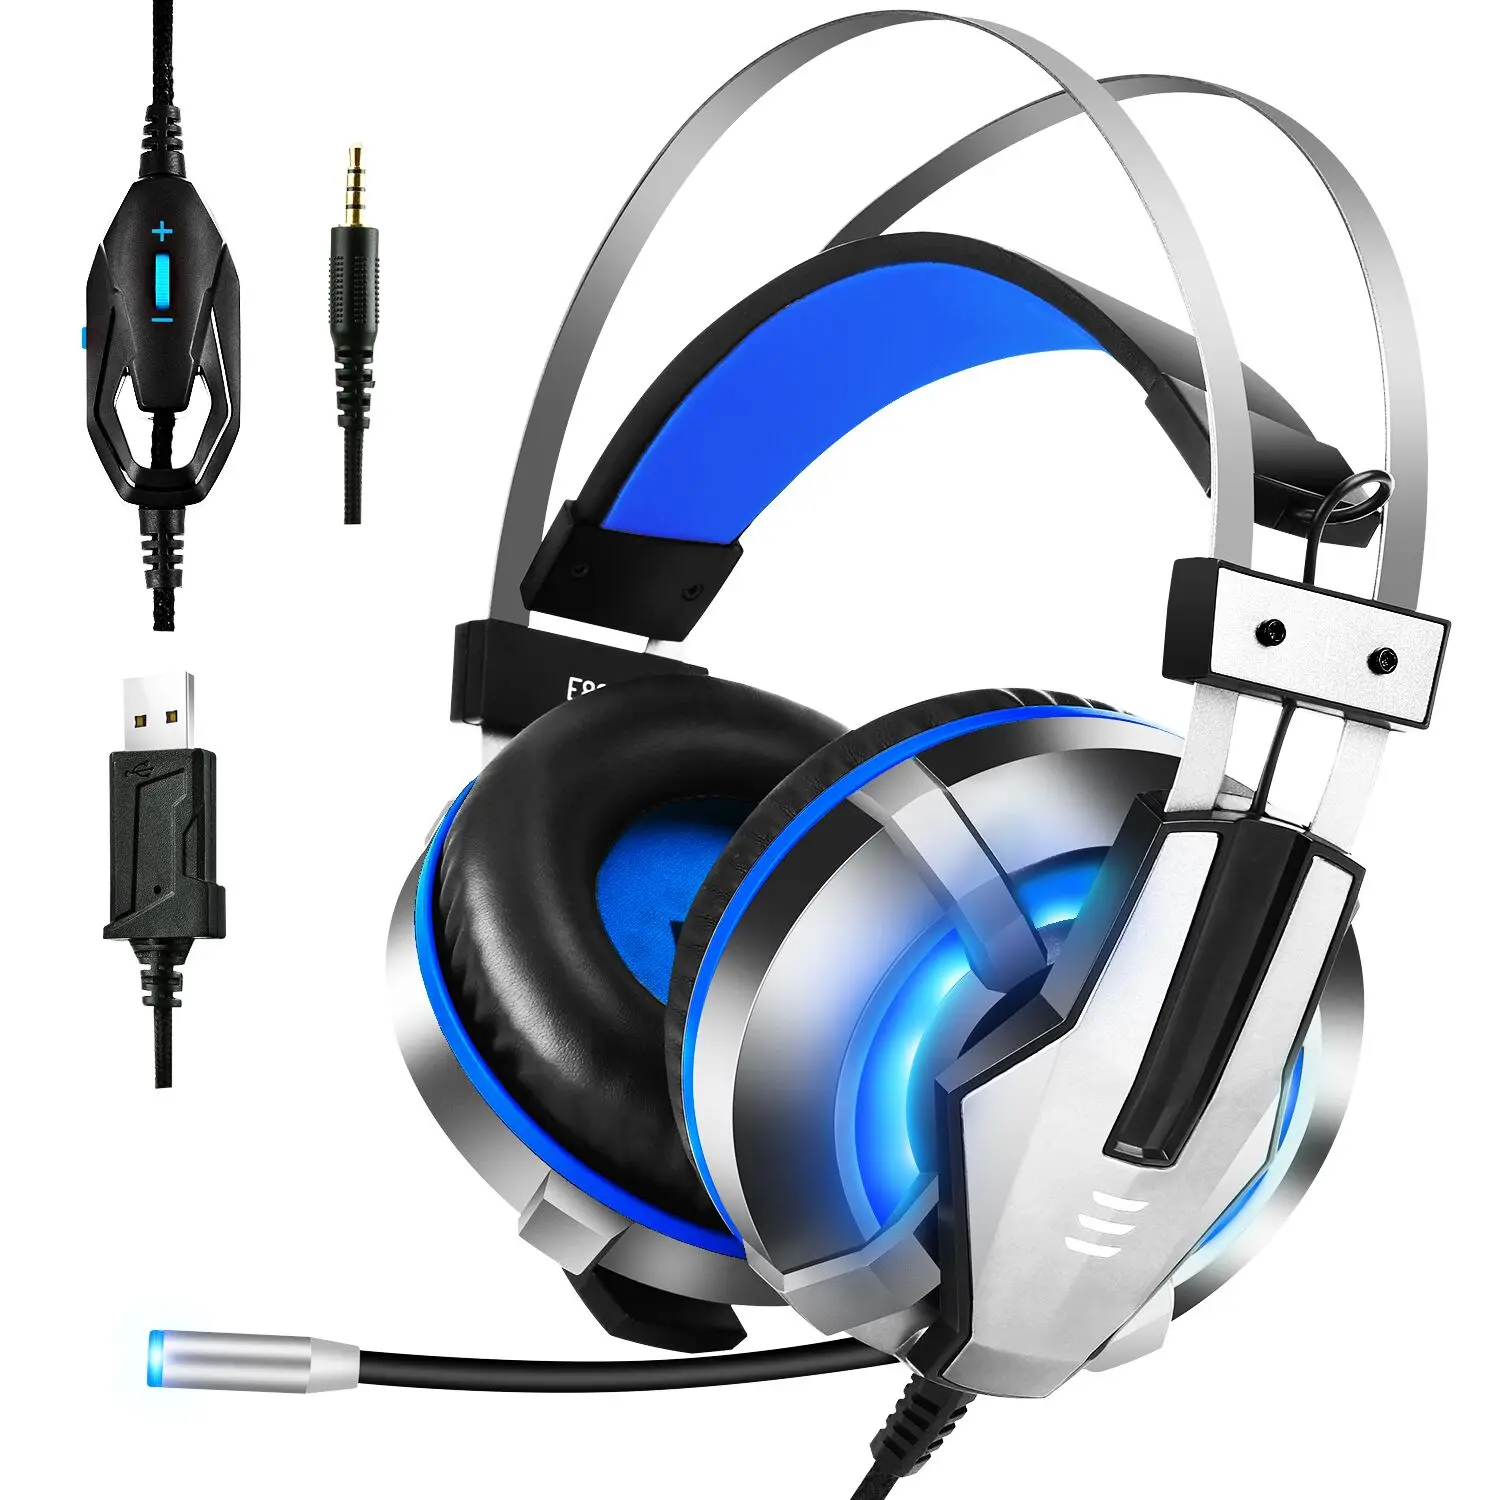 

EKSA Gaming Headset for PS4, PC, Xbox One Controller, Noise Cancelling Over Ear Headphones with Mic, LED Light, Bass Surround, Color